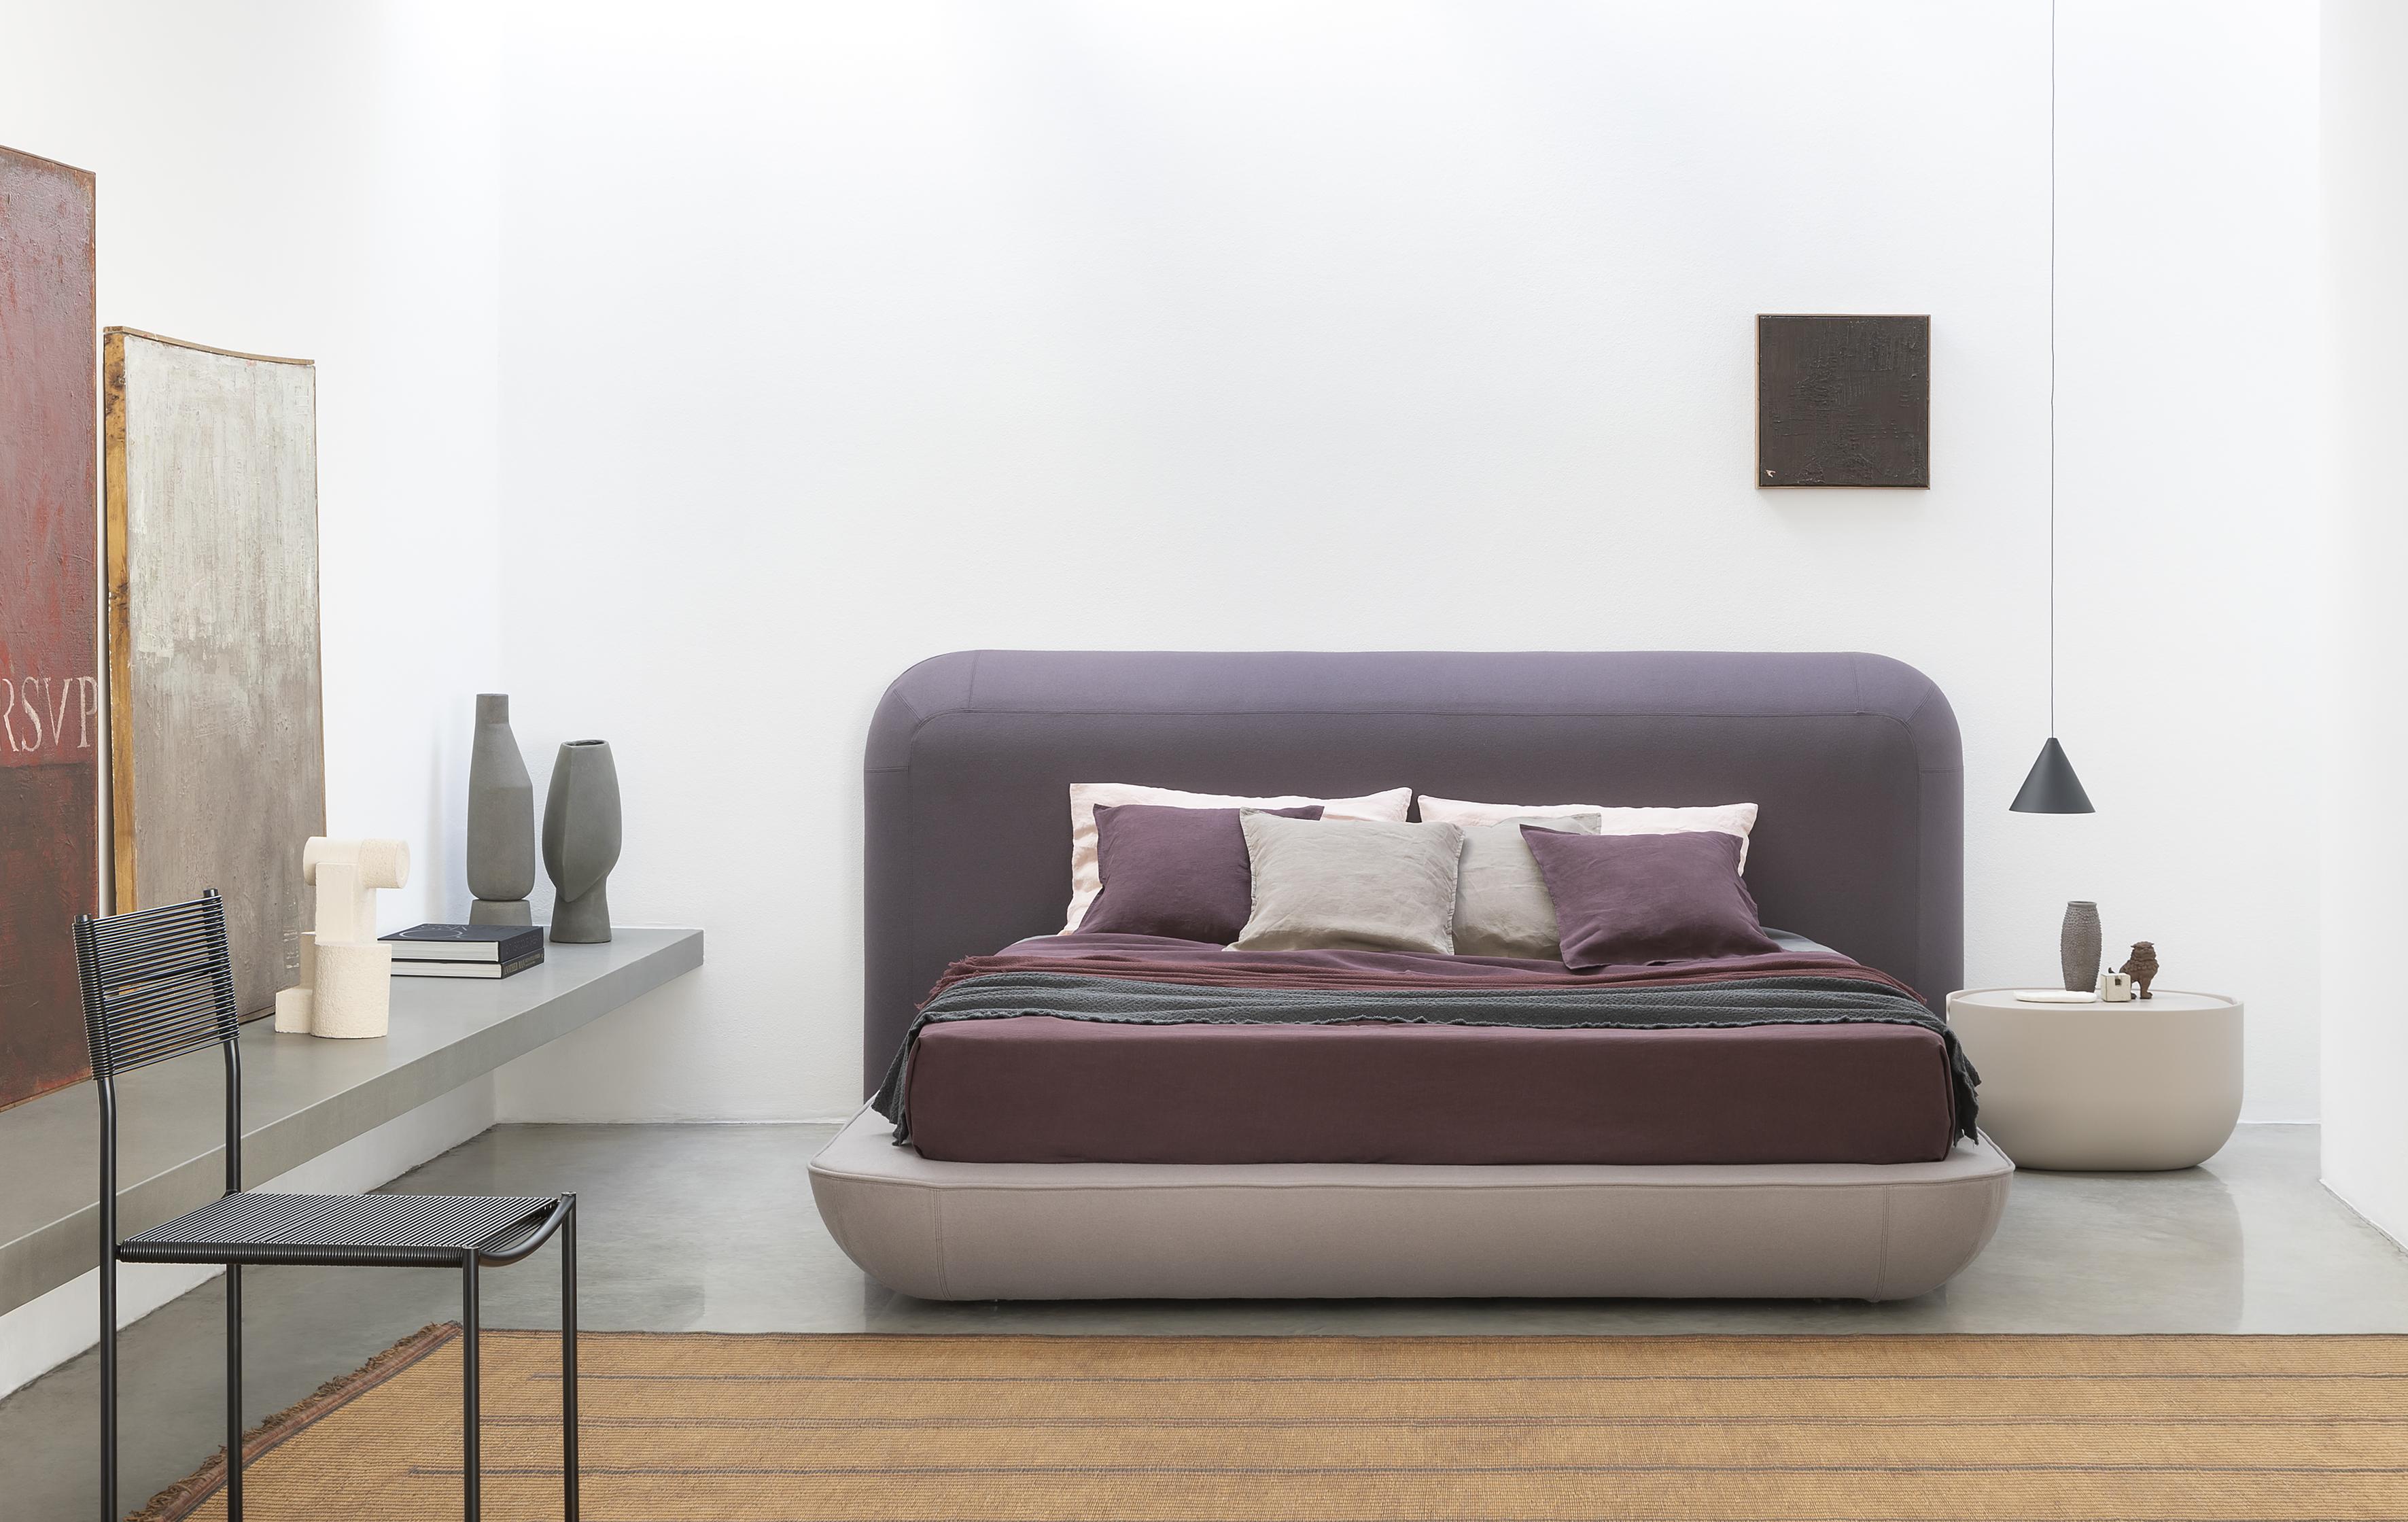 Alias 28A Large Okome Bed with Headboard Upholstered in White by Nendo

Bed with upholstered headbord and structure. Removable cover in eco leather Serge Ferrari®, Alias®, Camira® or Kvadrat® fabric or Pelle Frau® leather. Wooden staves. Mattress